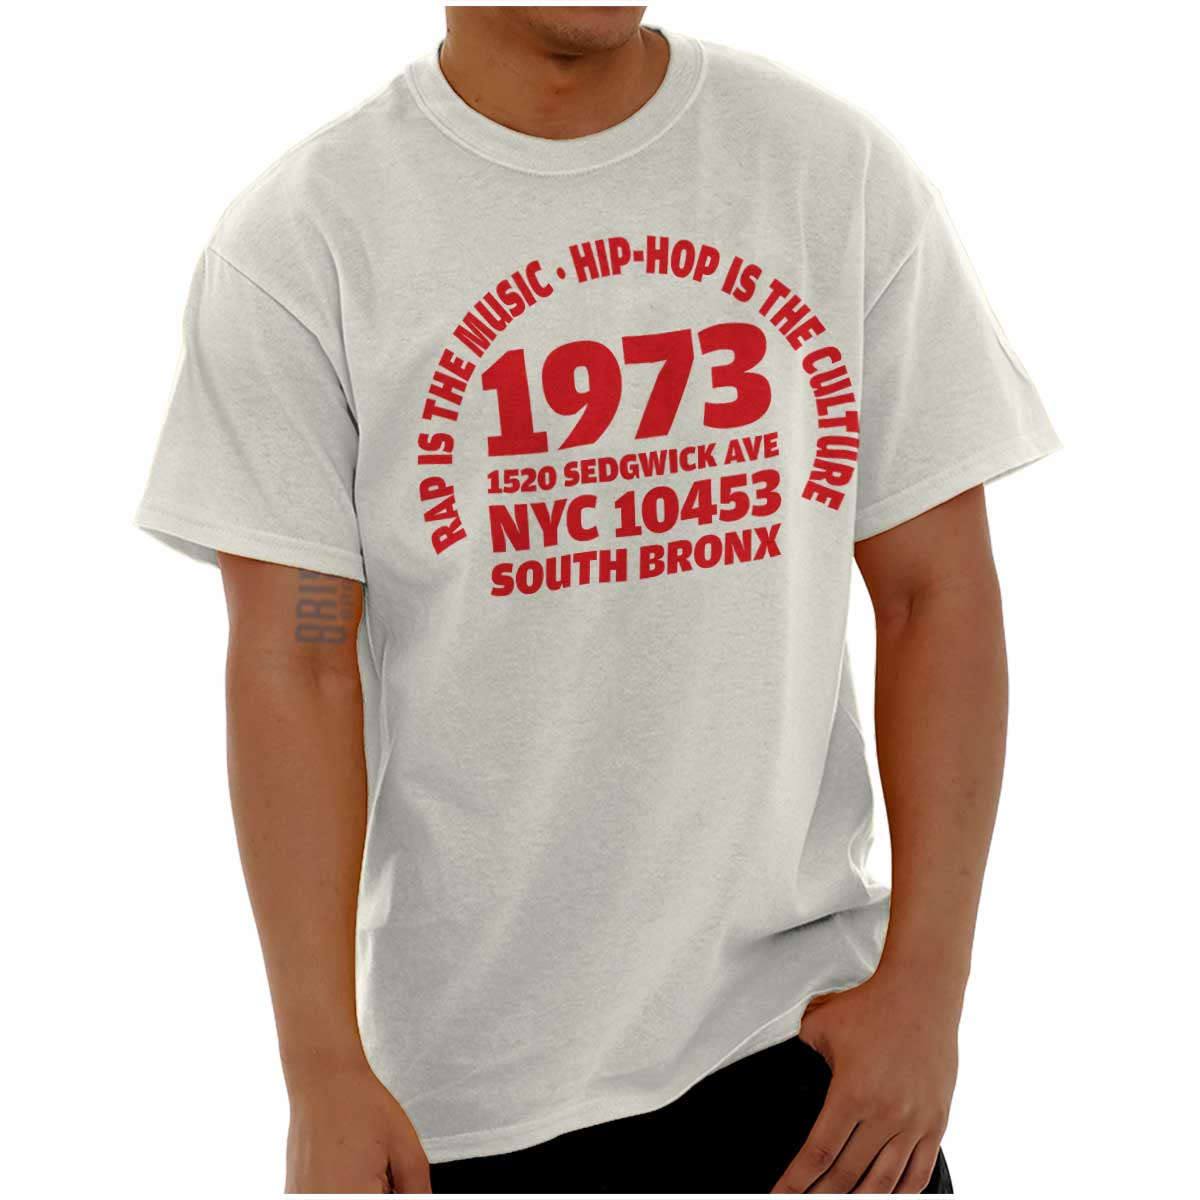 T-Shirts – The 50th Anniversary of Hip-Hop